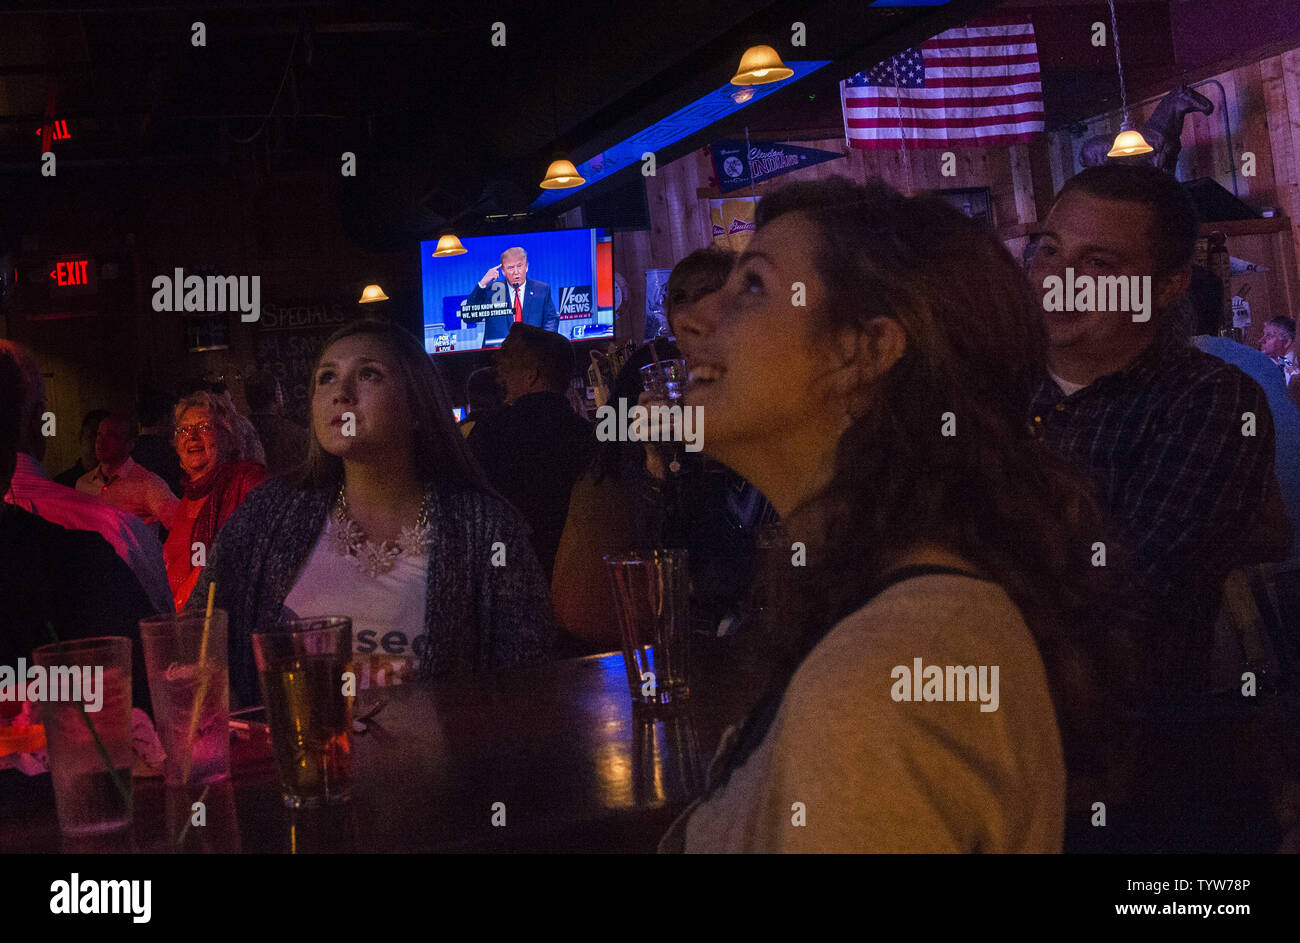 People attend a watch party for the Republican presidential debate at the Harry Buffalo bar in Cleveland, Ohio on August 6, 2015. The top ten candidates, Donald Trump, Jeb Bush, Scott Walker, Mike Huckabee, Ben Carson, Ted Cruz, Marco Rubio, Rand Paul, Chris Christie and John Kasich met in the first prime time debate for the 2016 presidential election while the six other major declared candidates, Rick Santorum, Bobby Jindal, Carly Fiorina, Lindsey Graham, George Pataki, and Jim Gilmore, participated in an earlier debate.  Photo by Kevin Dietsch/UPI Stock Photo